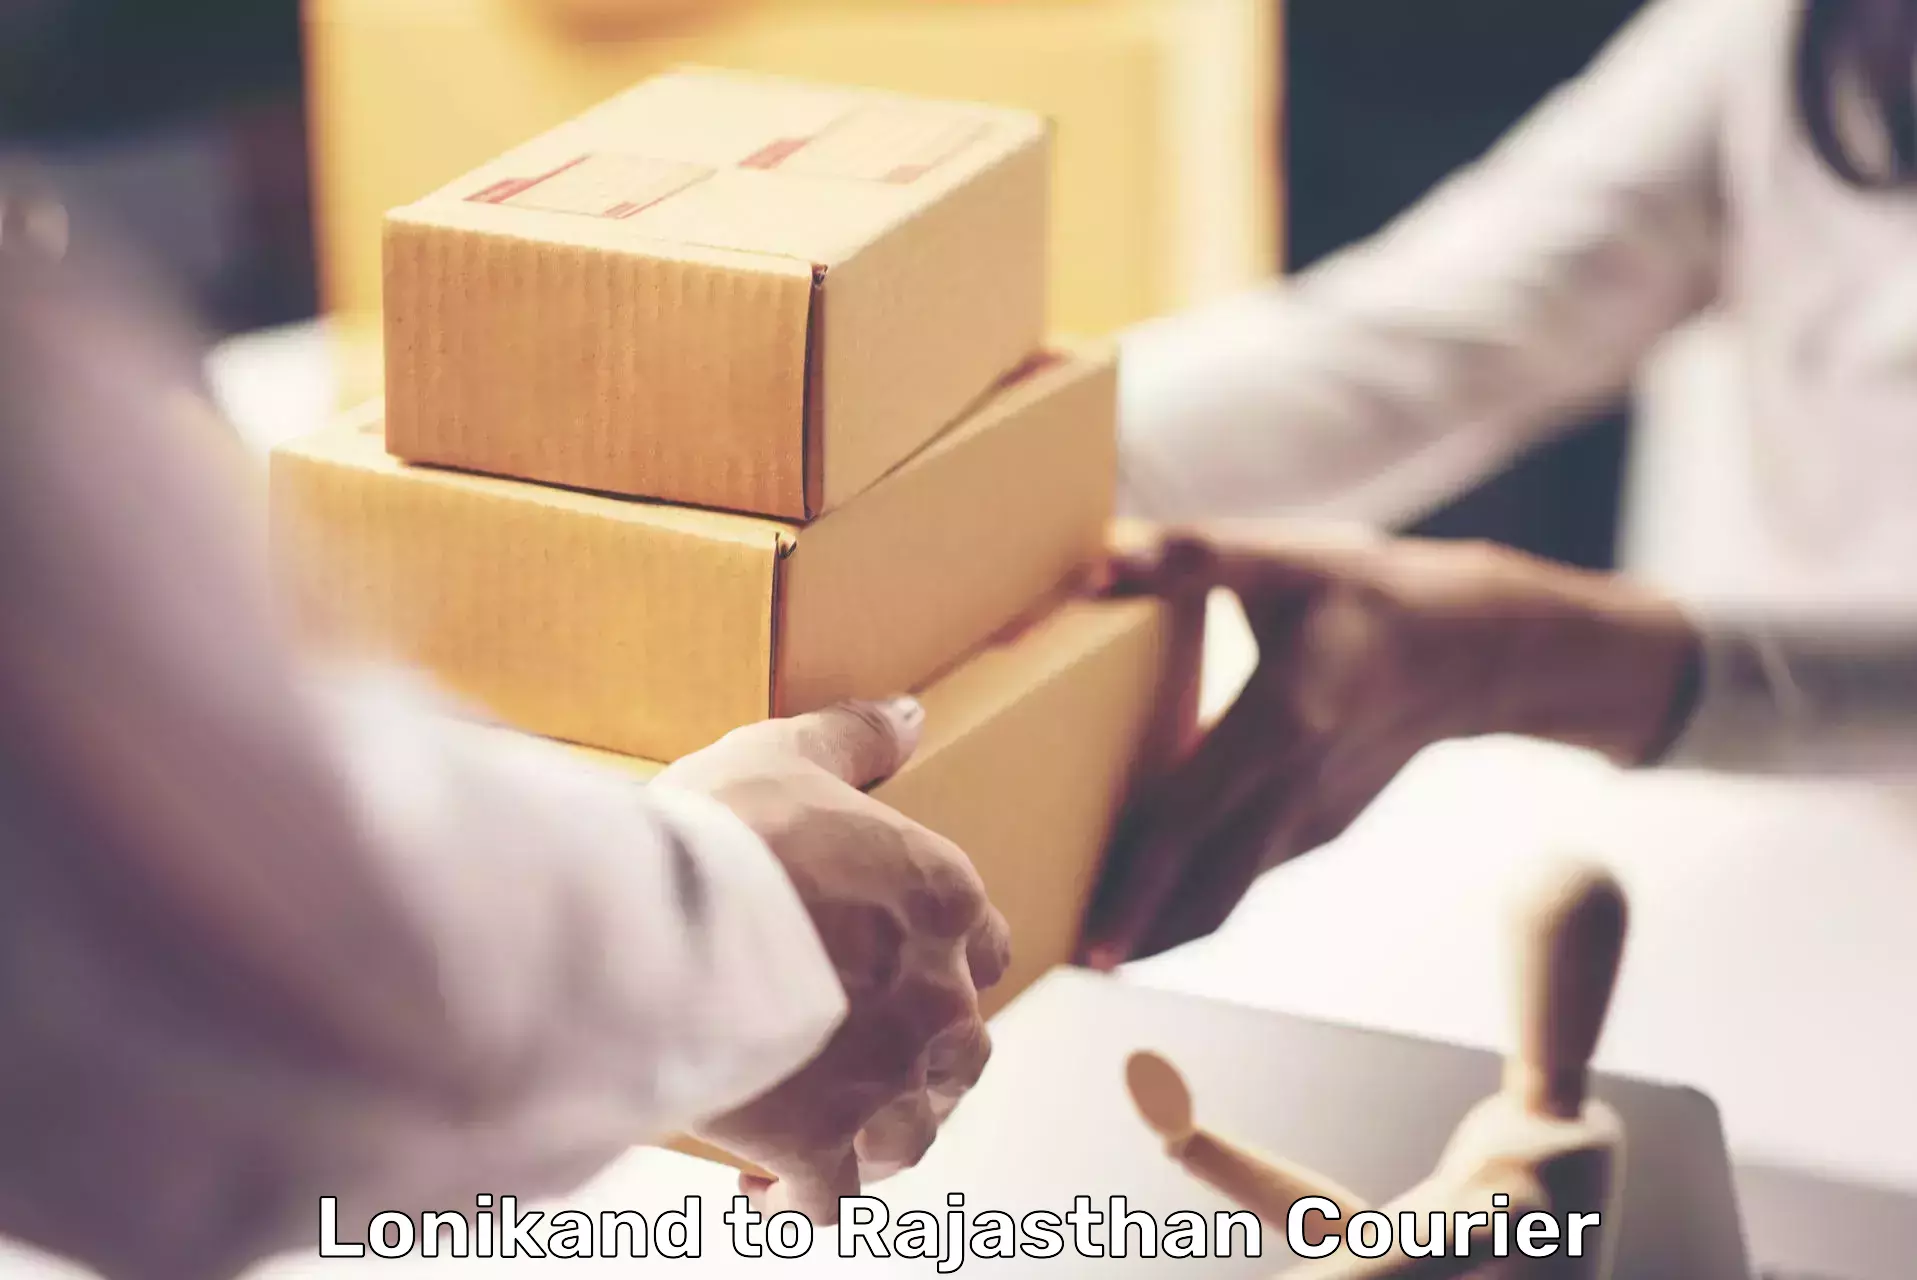 Courier app Lonikand to Rajasthan